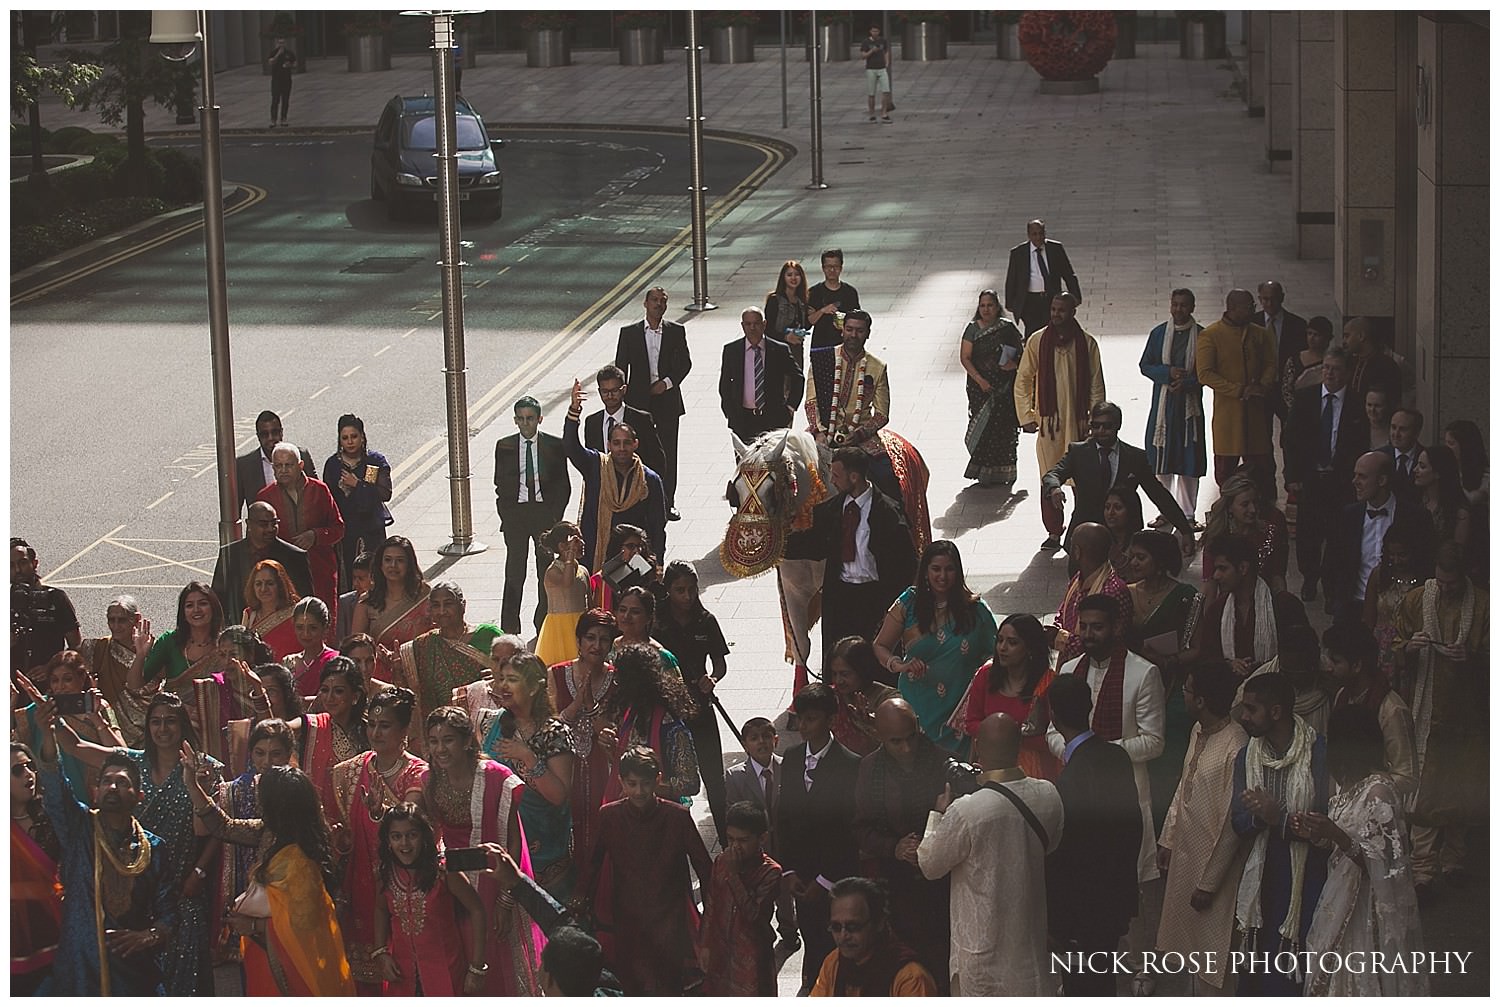  Colourful hindu Baraat wedding entrance with the Indian groom on a horse in Canary Wharf 